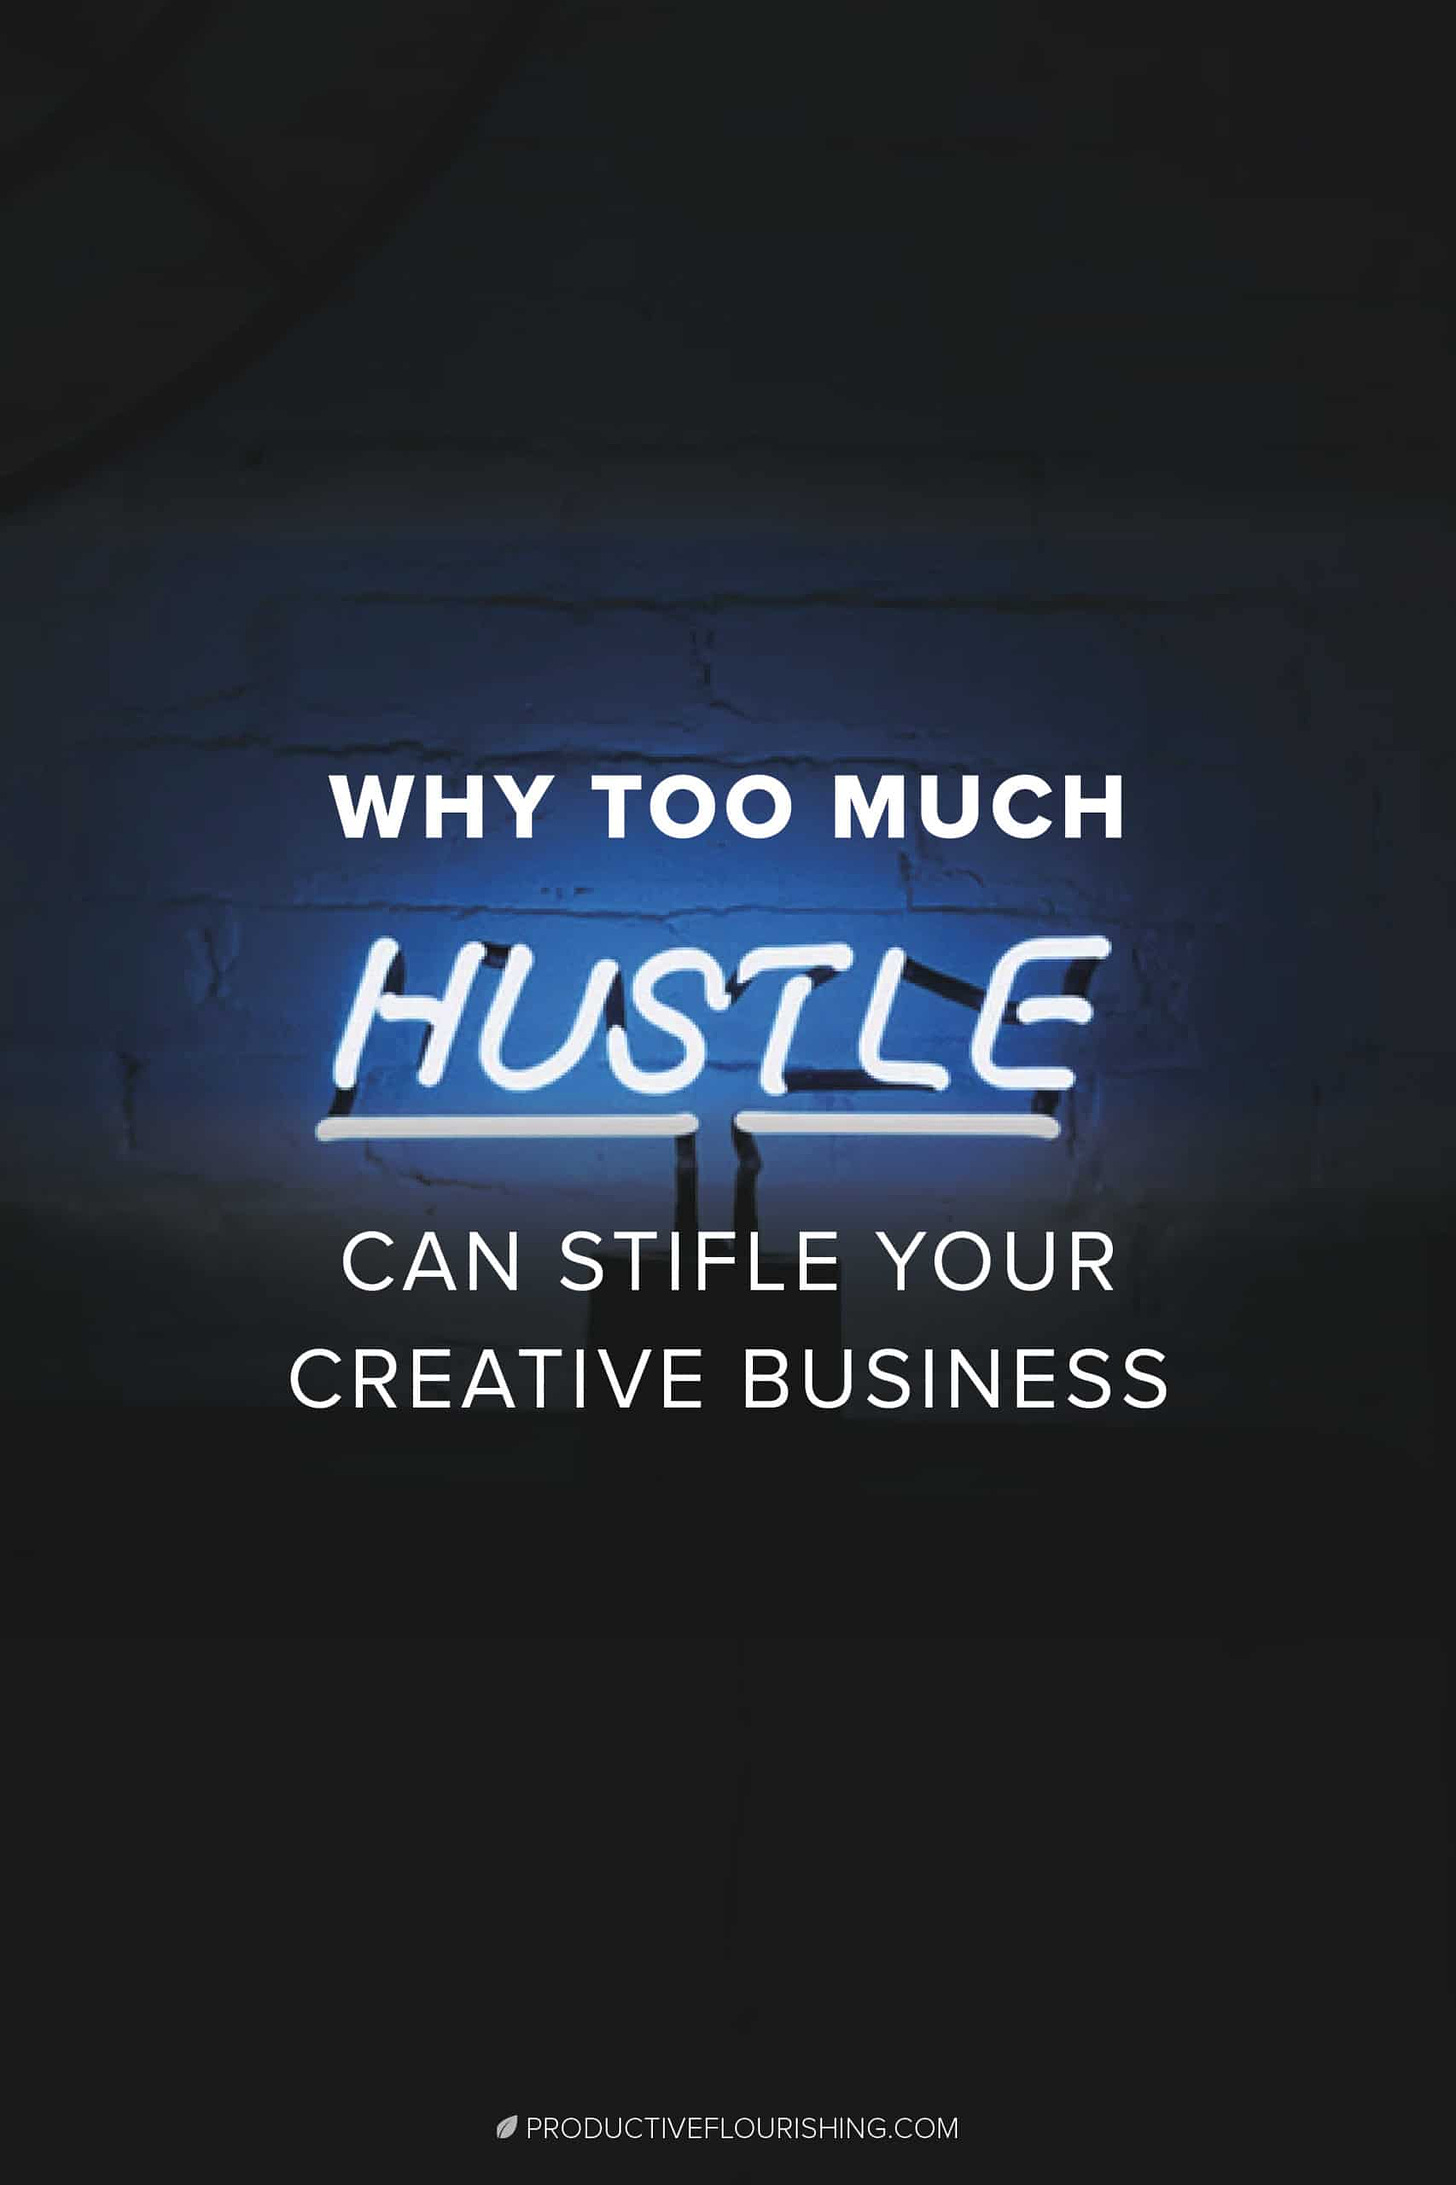 Why Too Much Hustle Can Stifle Your Creative Business. Learn how to design your small business to work for your circumstances. Find out how to set your goal to design a business that “works for your bank account and supports your well-being.” As a creative entrepreneur, you need to think differently about your time. #smallbusinesshustle #creativeentrepreneur #productiveflourishing